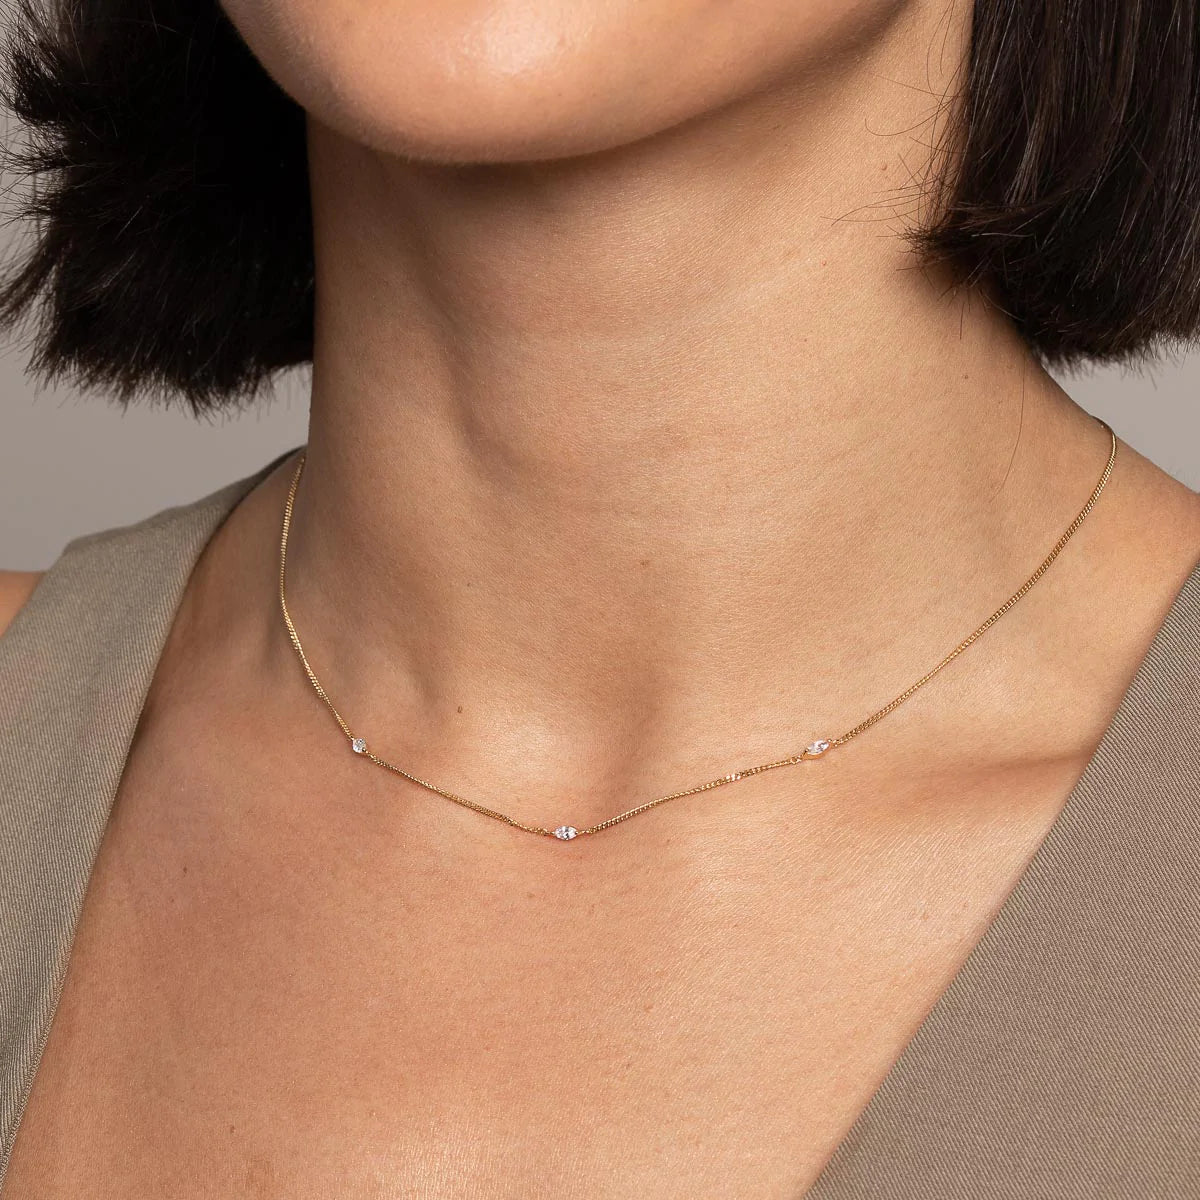 Station Navette Crystal Necklace in Gold worn